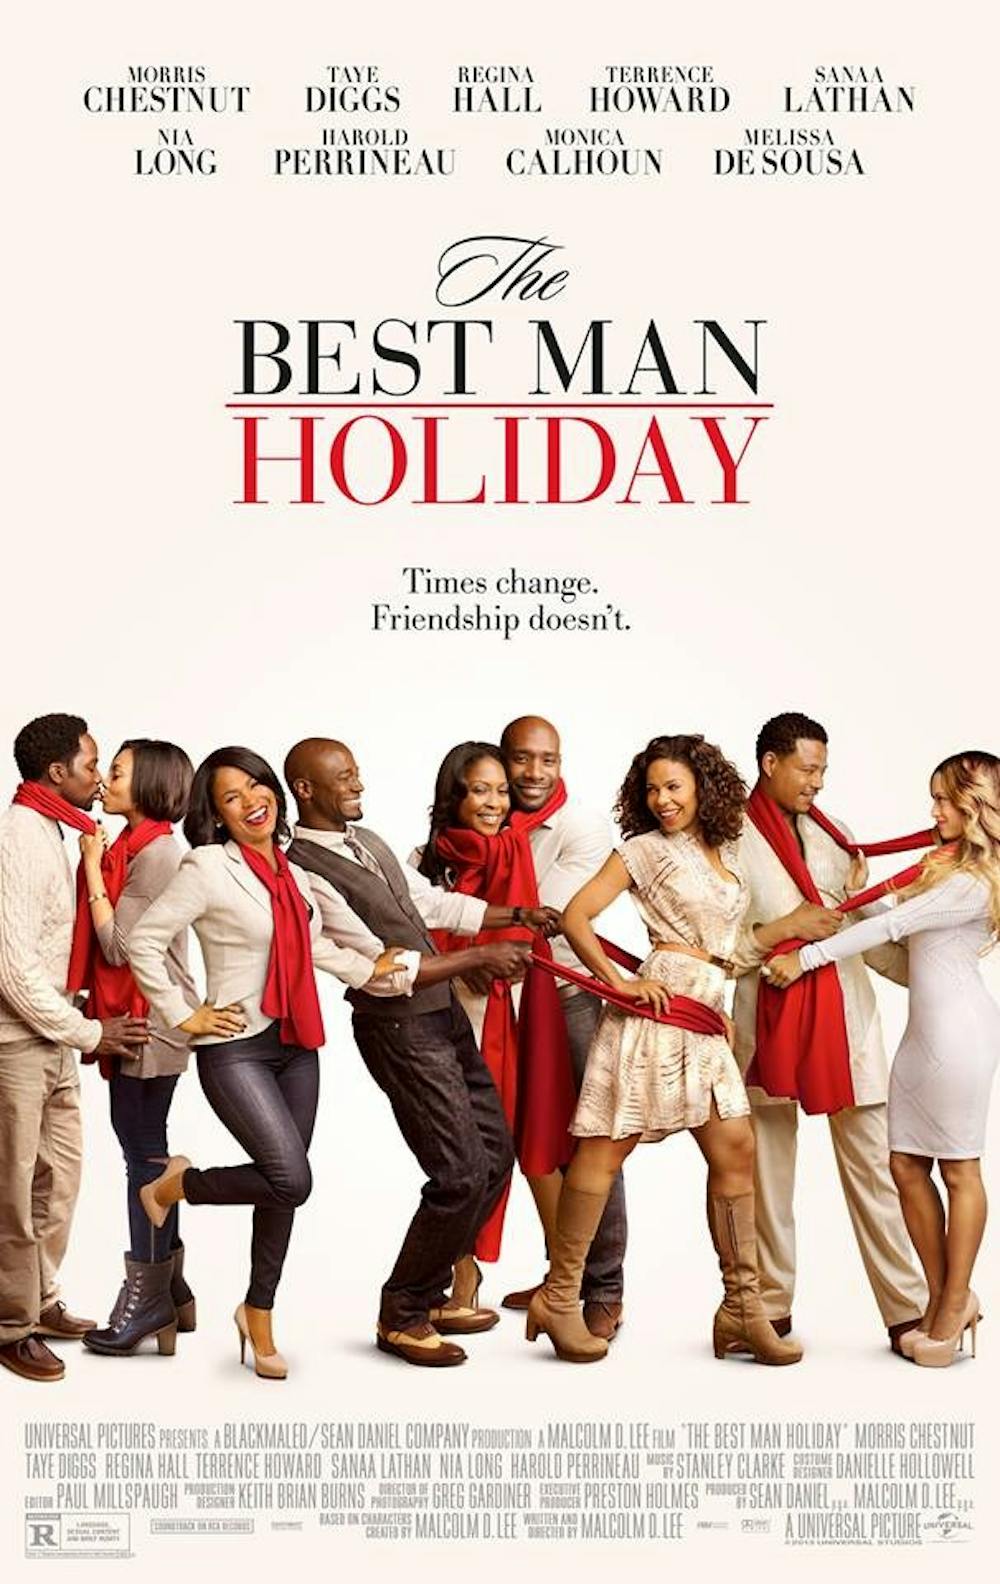 'The Best Man Holiday' a touching, hilarious sequel